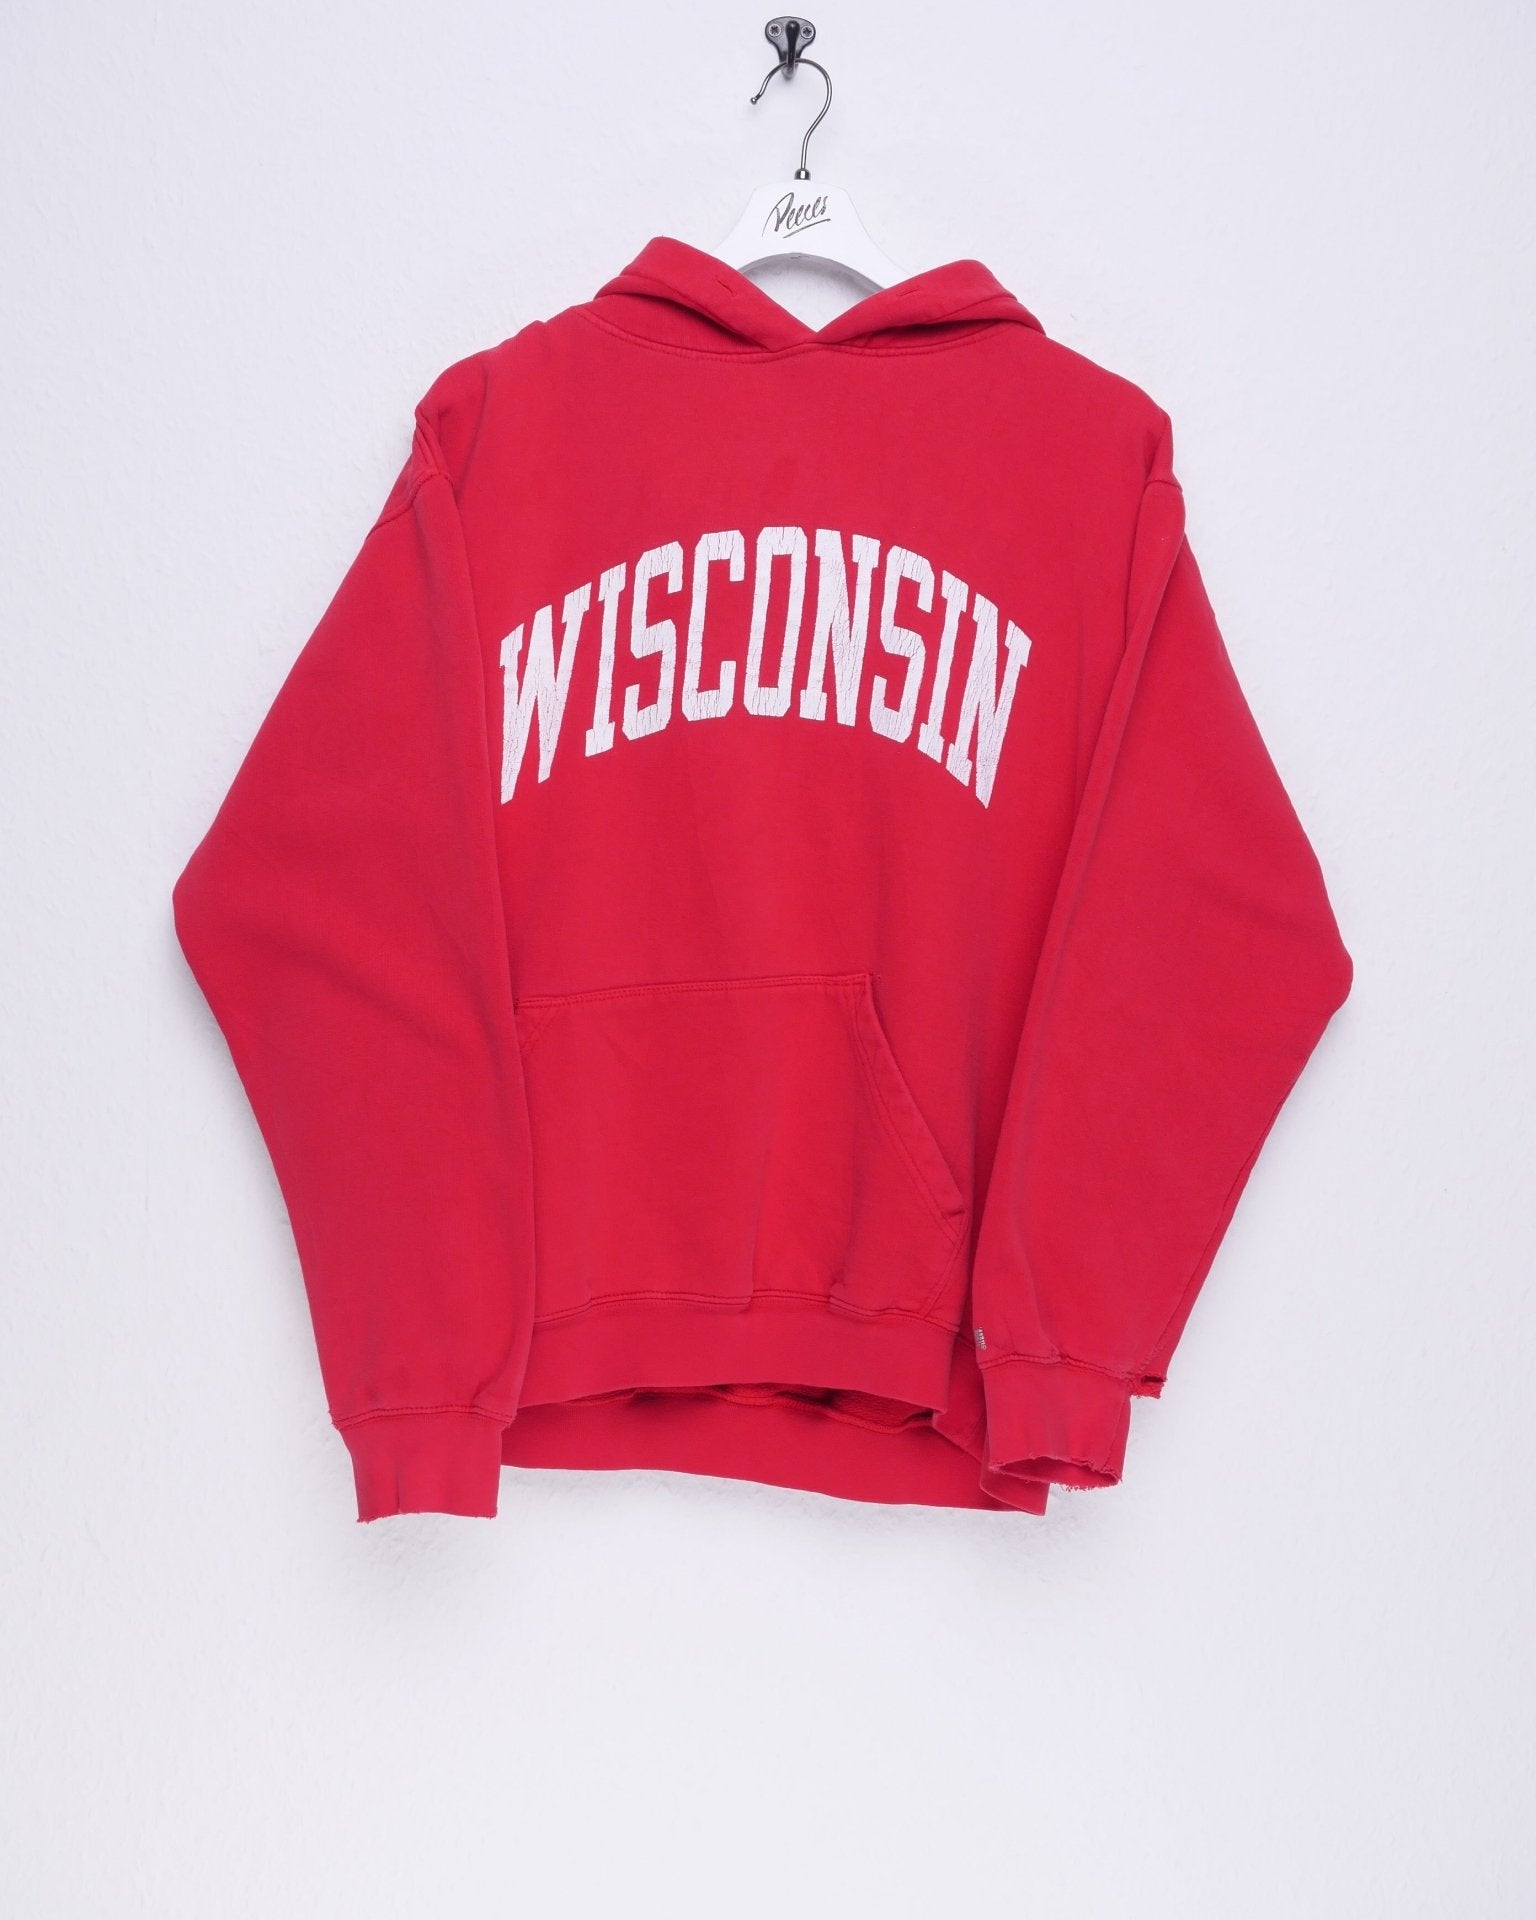 Wisconsin printed Spellout red Hoodie - Peeces